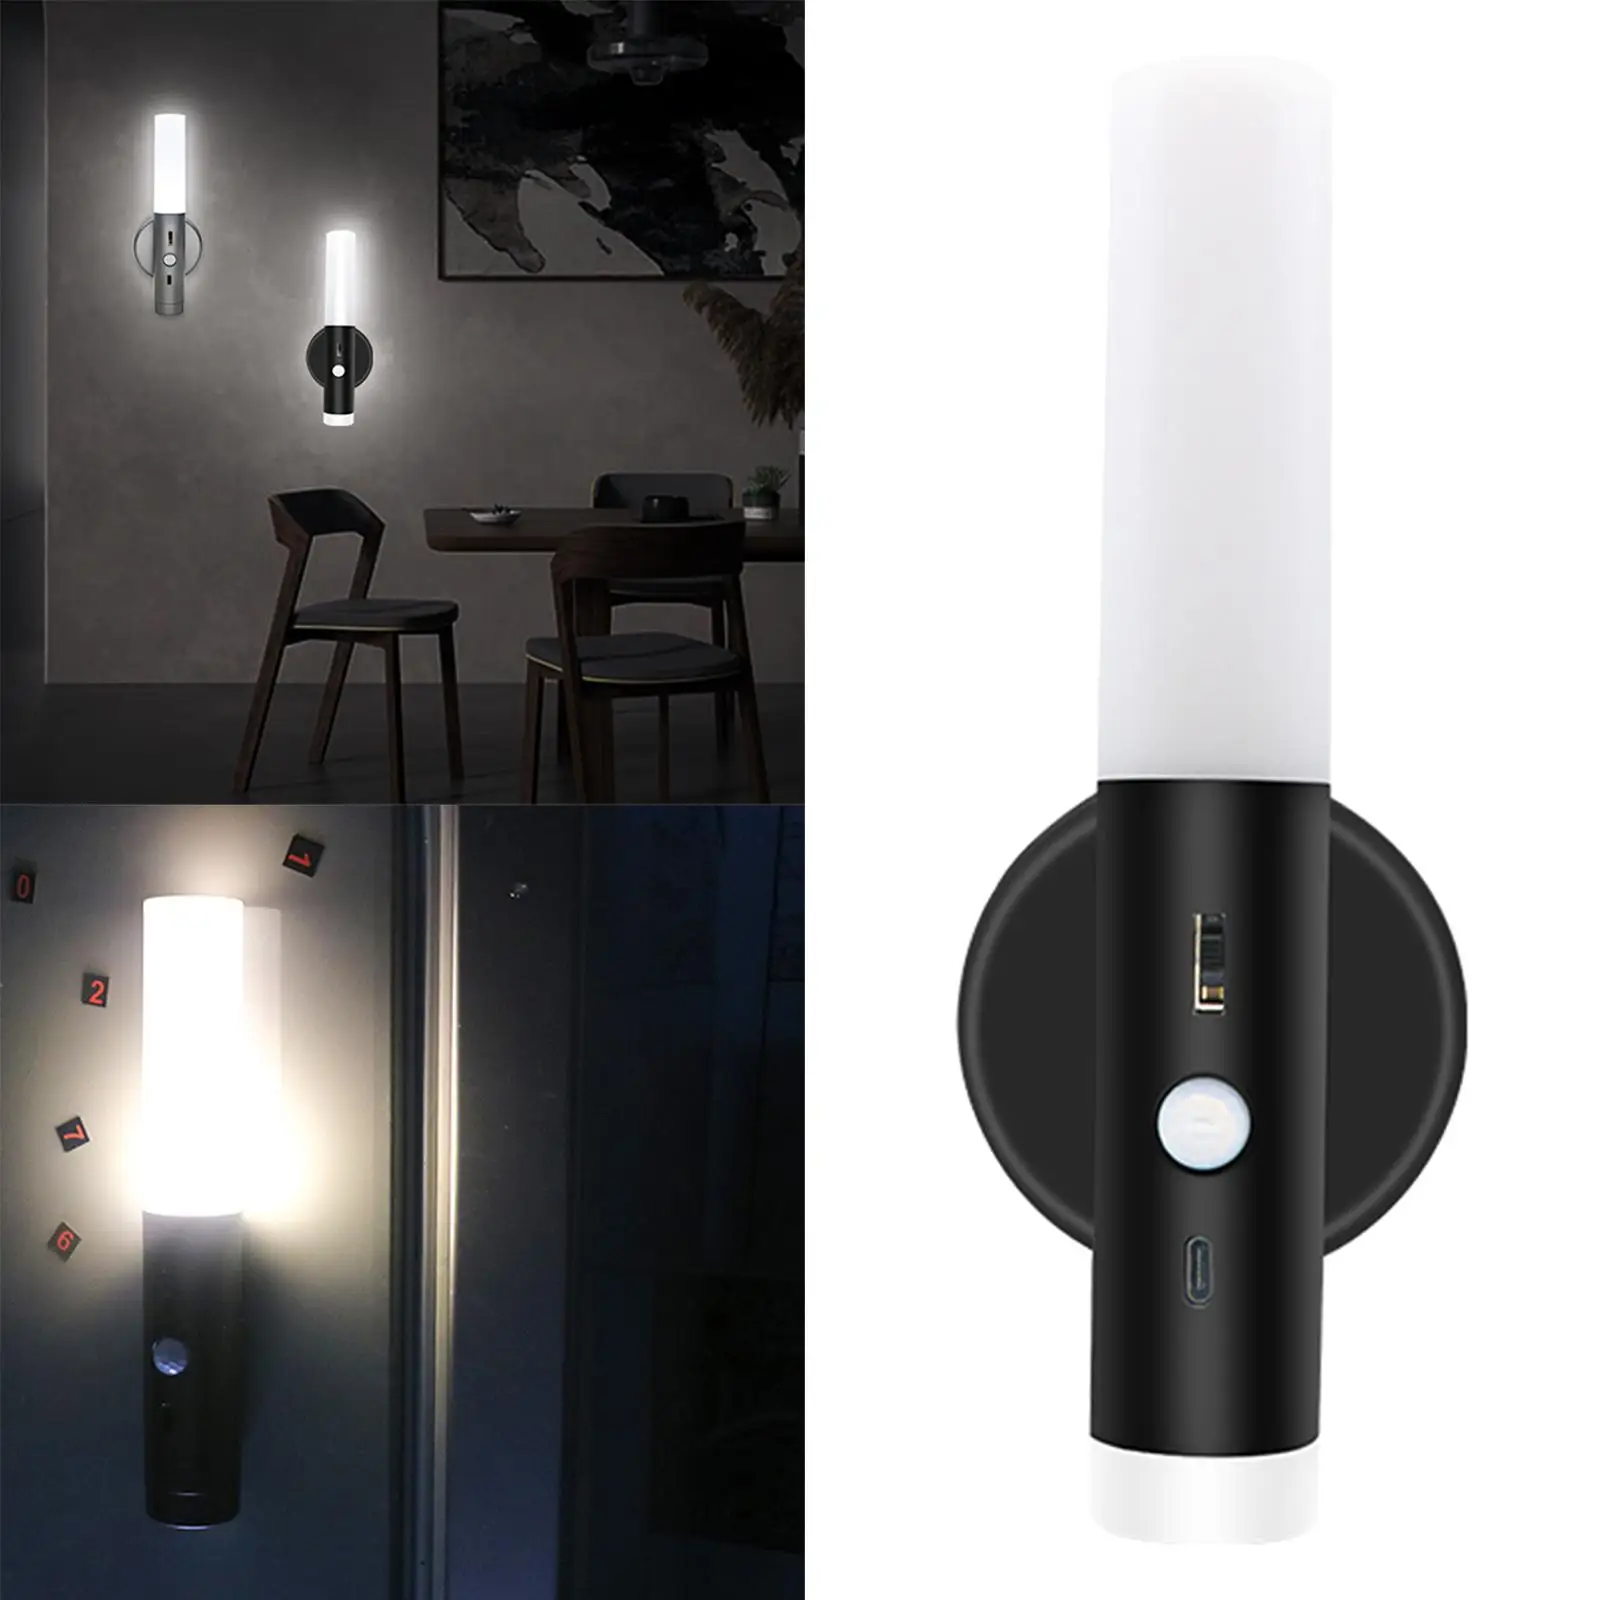 Cordless Motion Sensor Night Light USB Wall Sconce Closet Light with 3 Modes Under Counter Hand-Held for Home Kitchen Bedroom